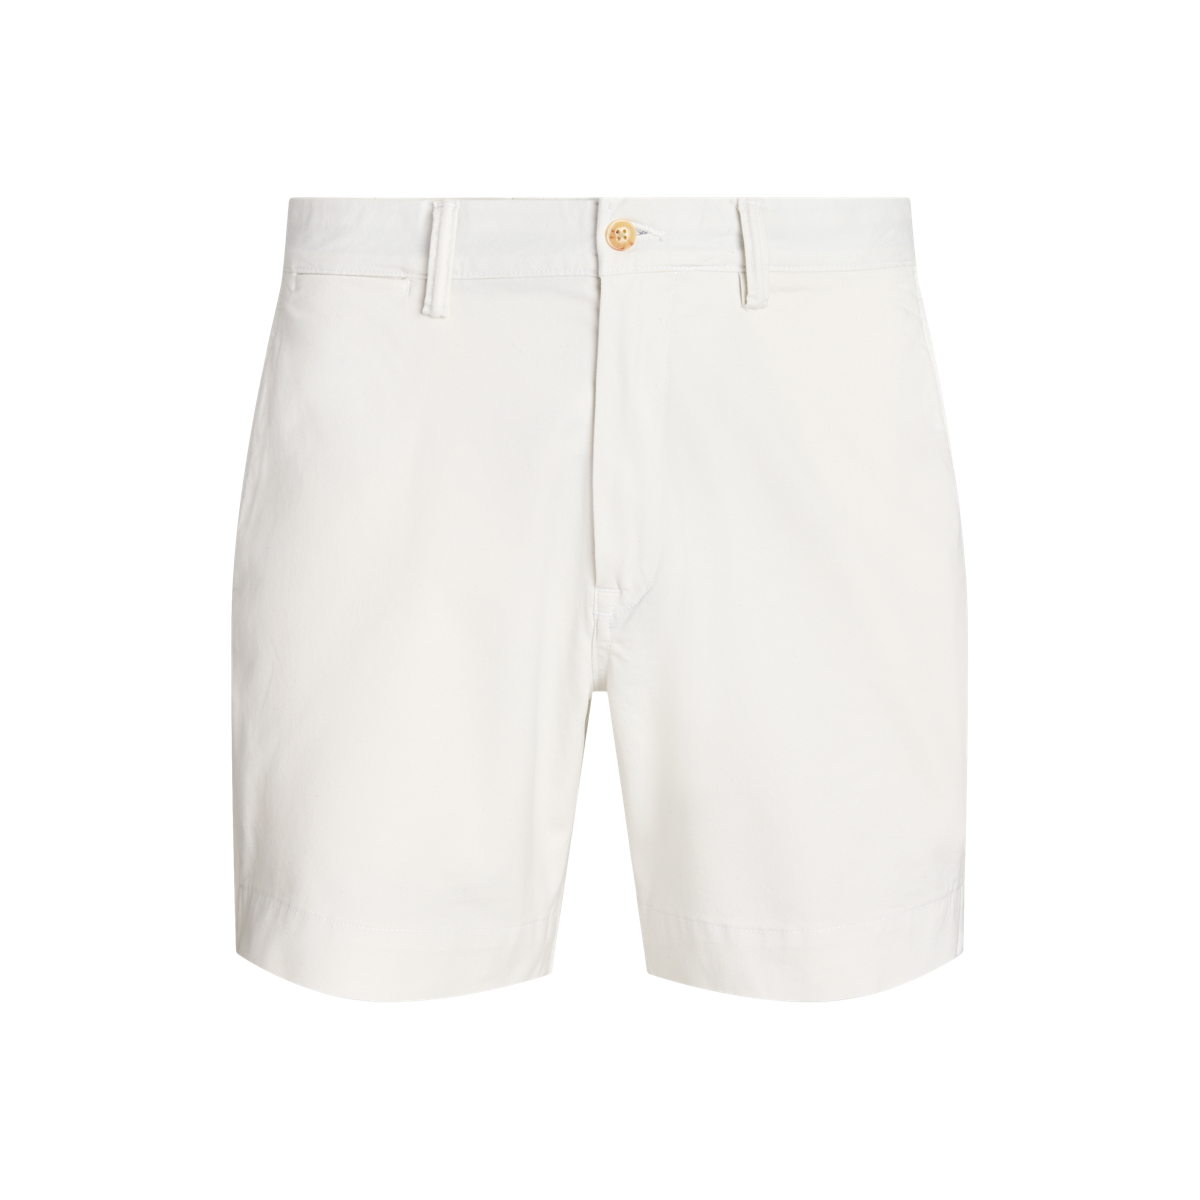 Polo Ralph Lauren Stretch Classic-Fit Chino 6 Inseam Shorts - 36